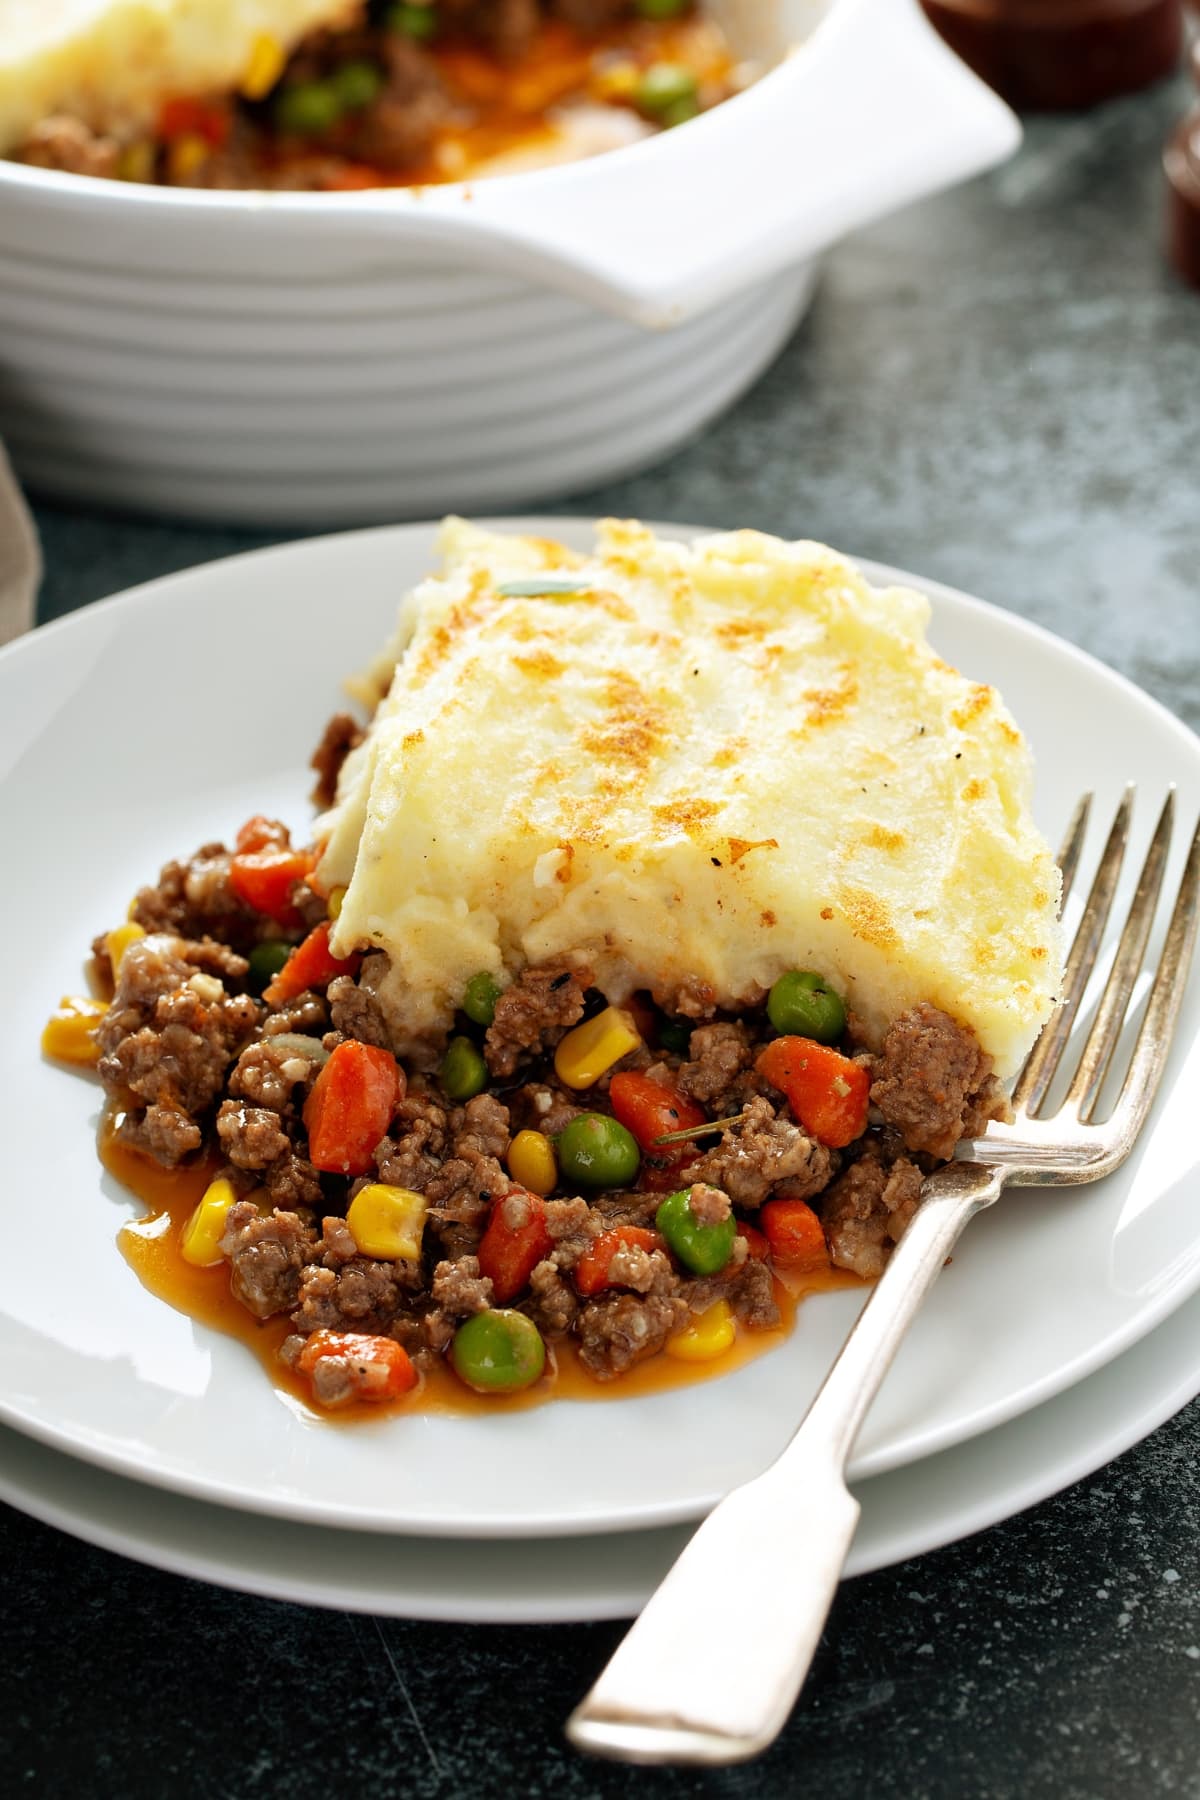 Shepherd's Pie with Ground Beef and Vegetables